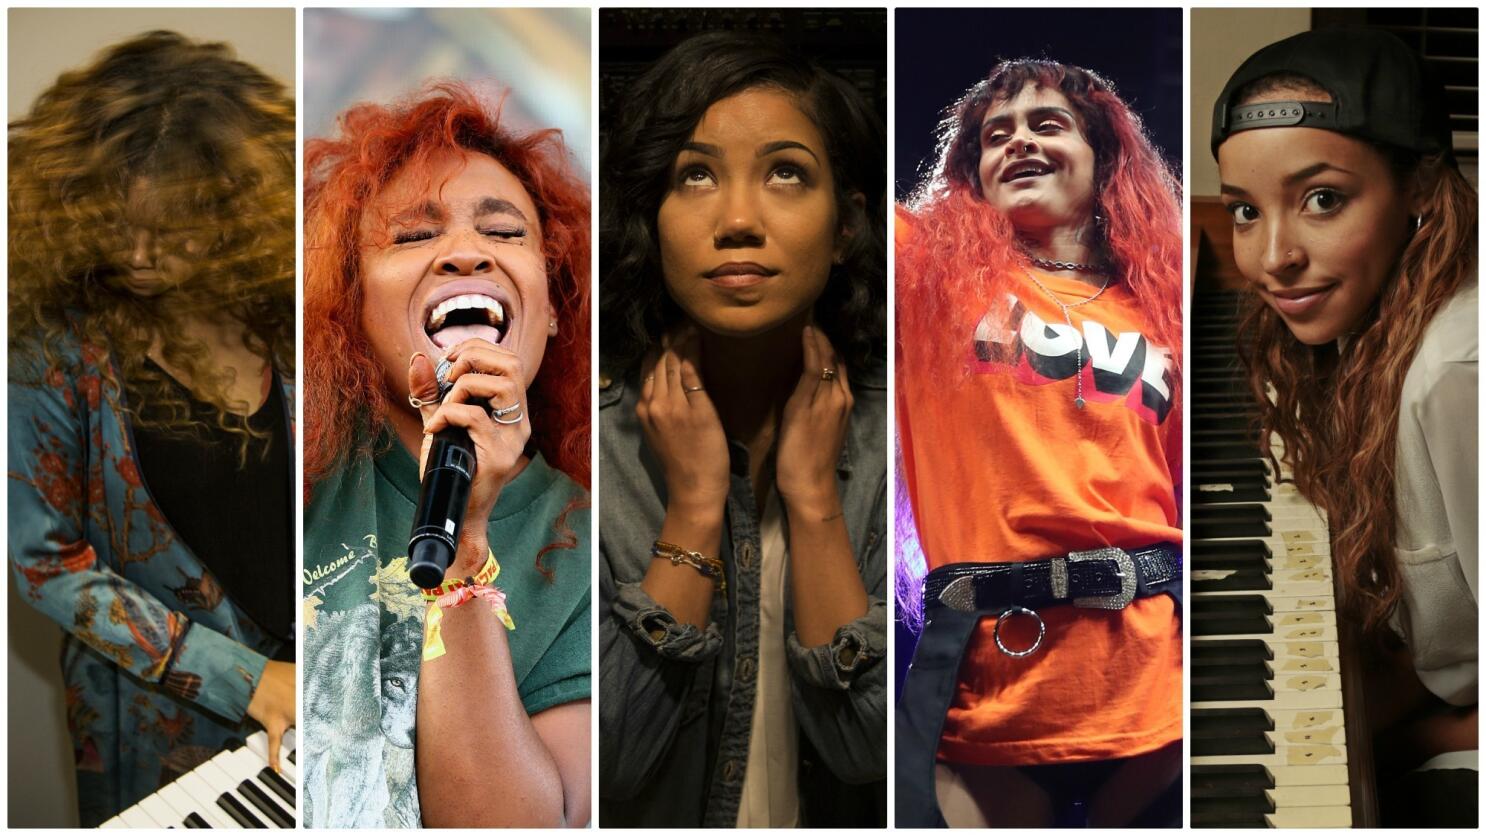 When you're black you have to fight': Tinashe, Kehlani and other